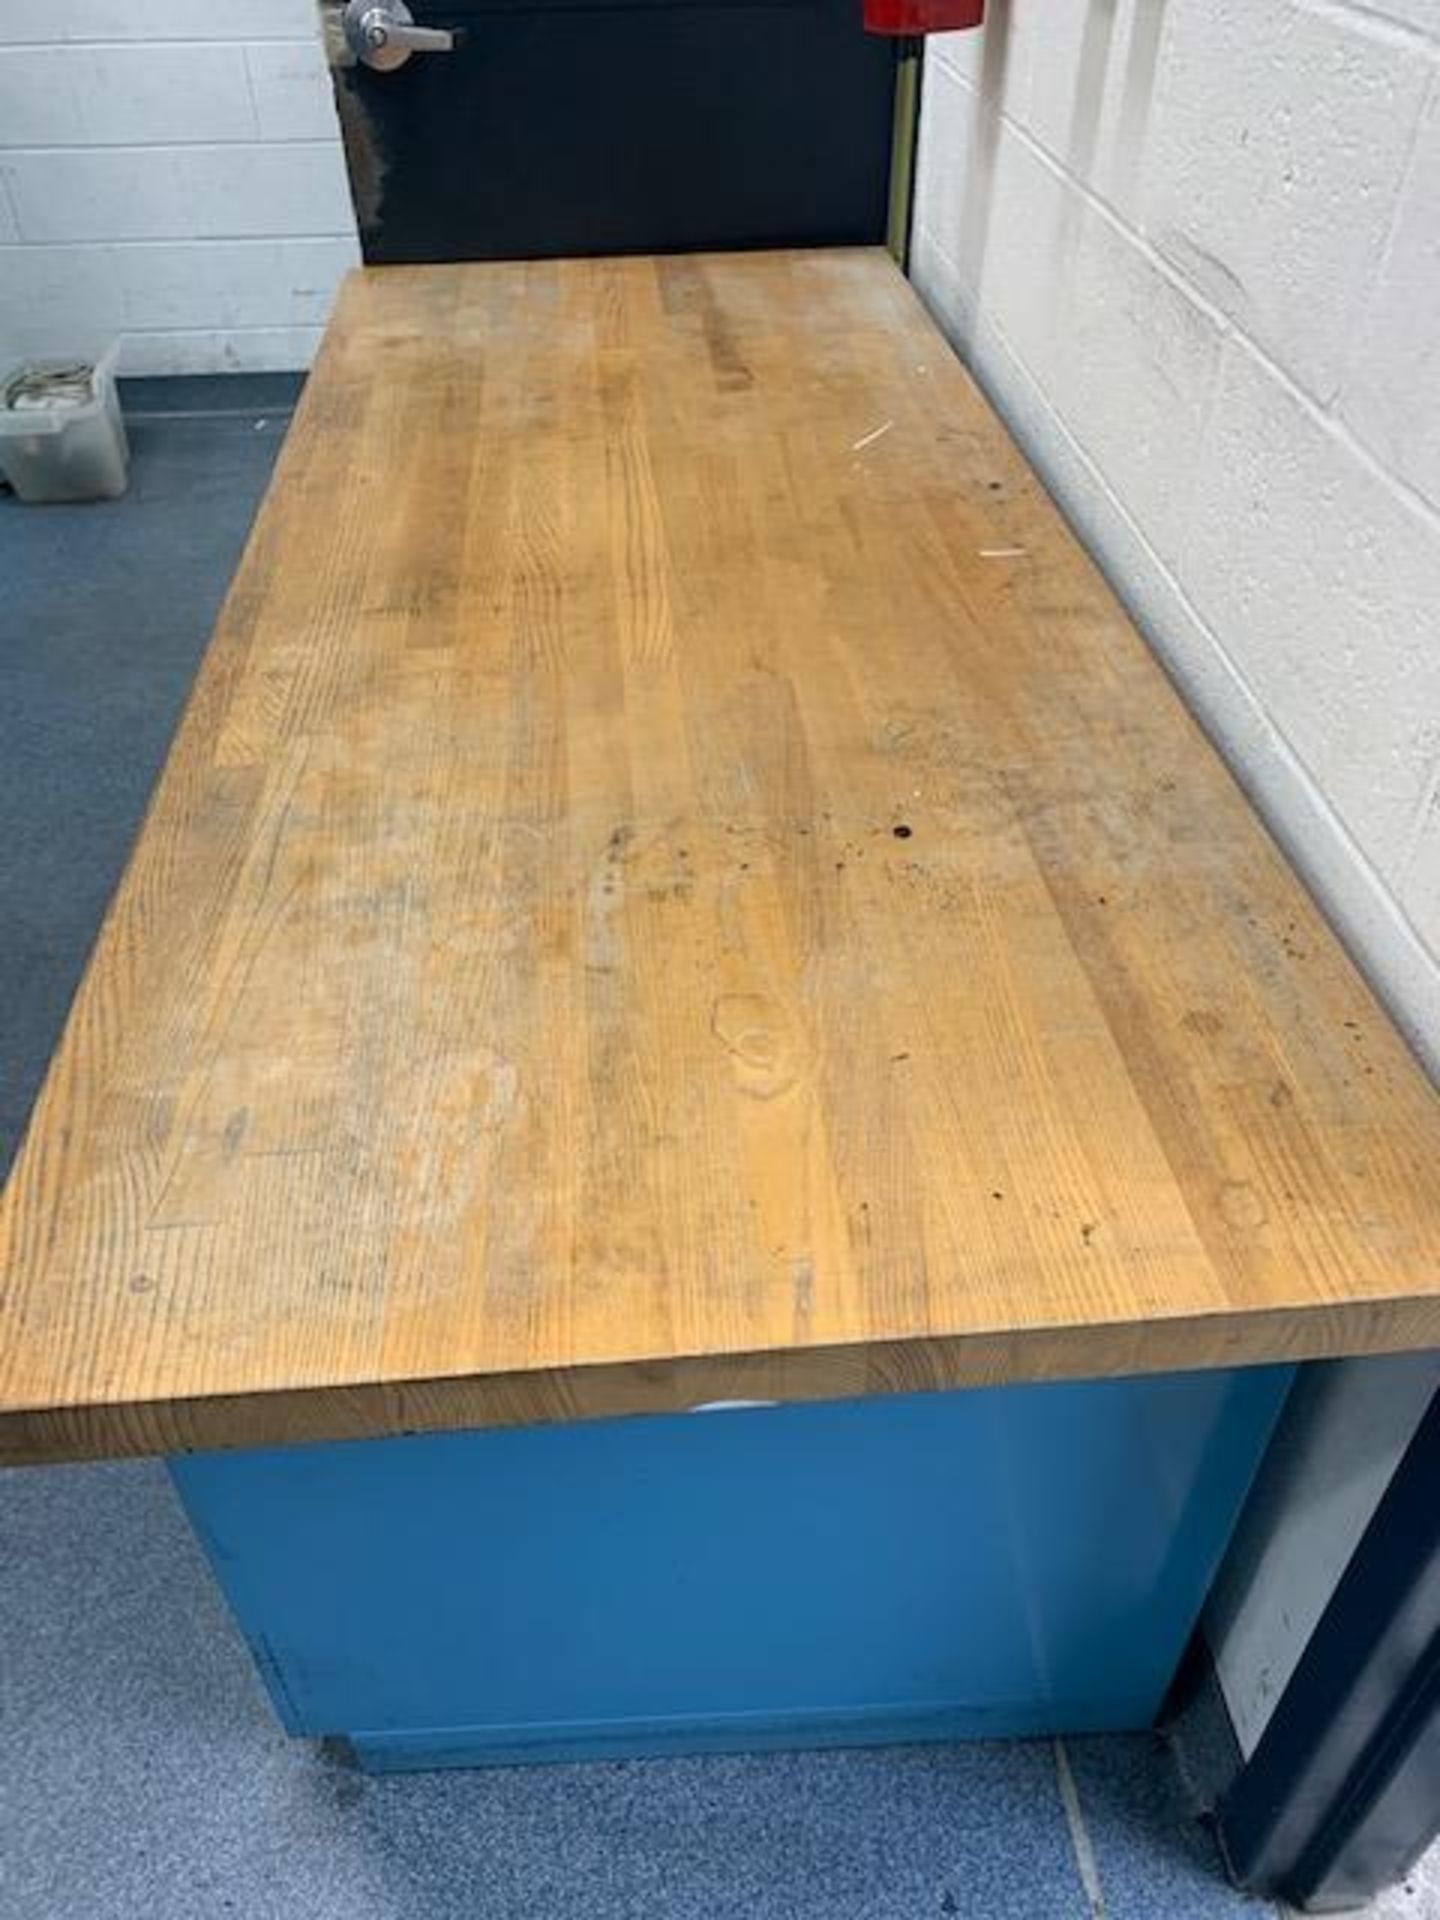 30" x 72" x 1-3/4" Oak Table Top sitting on 3 Workplace 2 Drawer Cabinets - Image 6 of 6